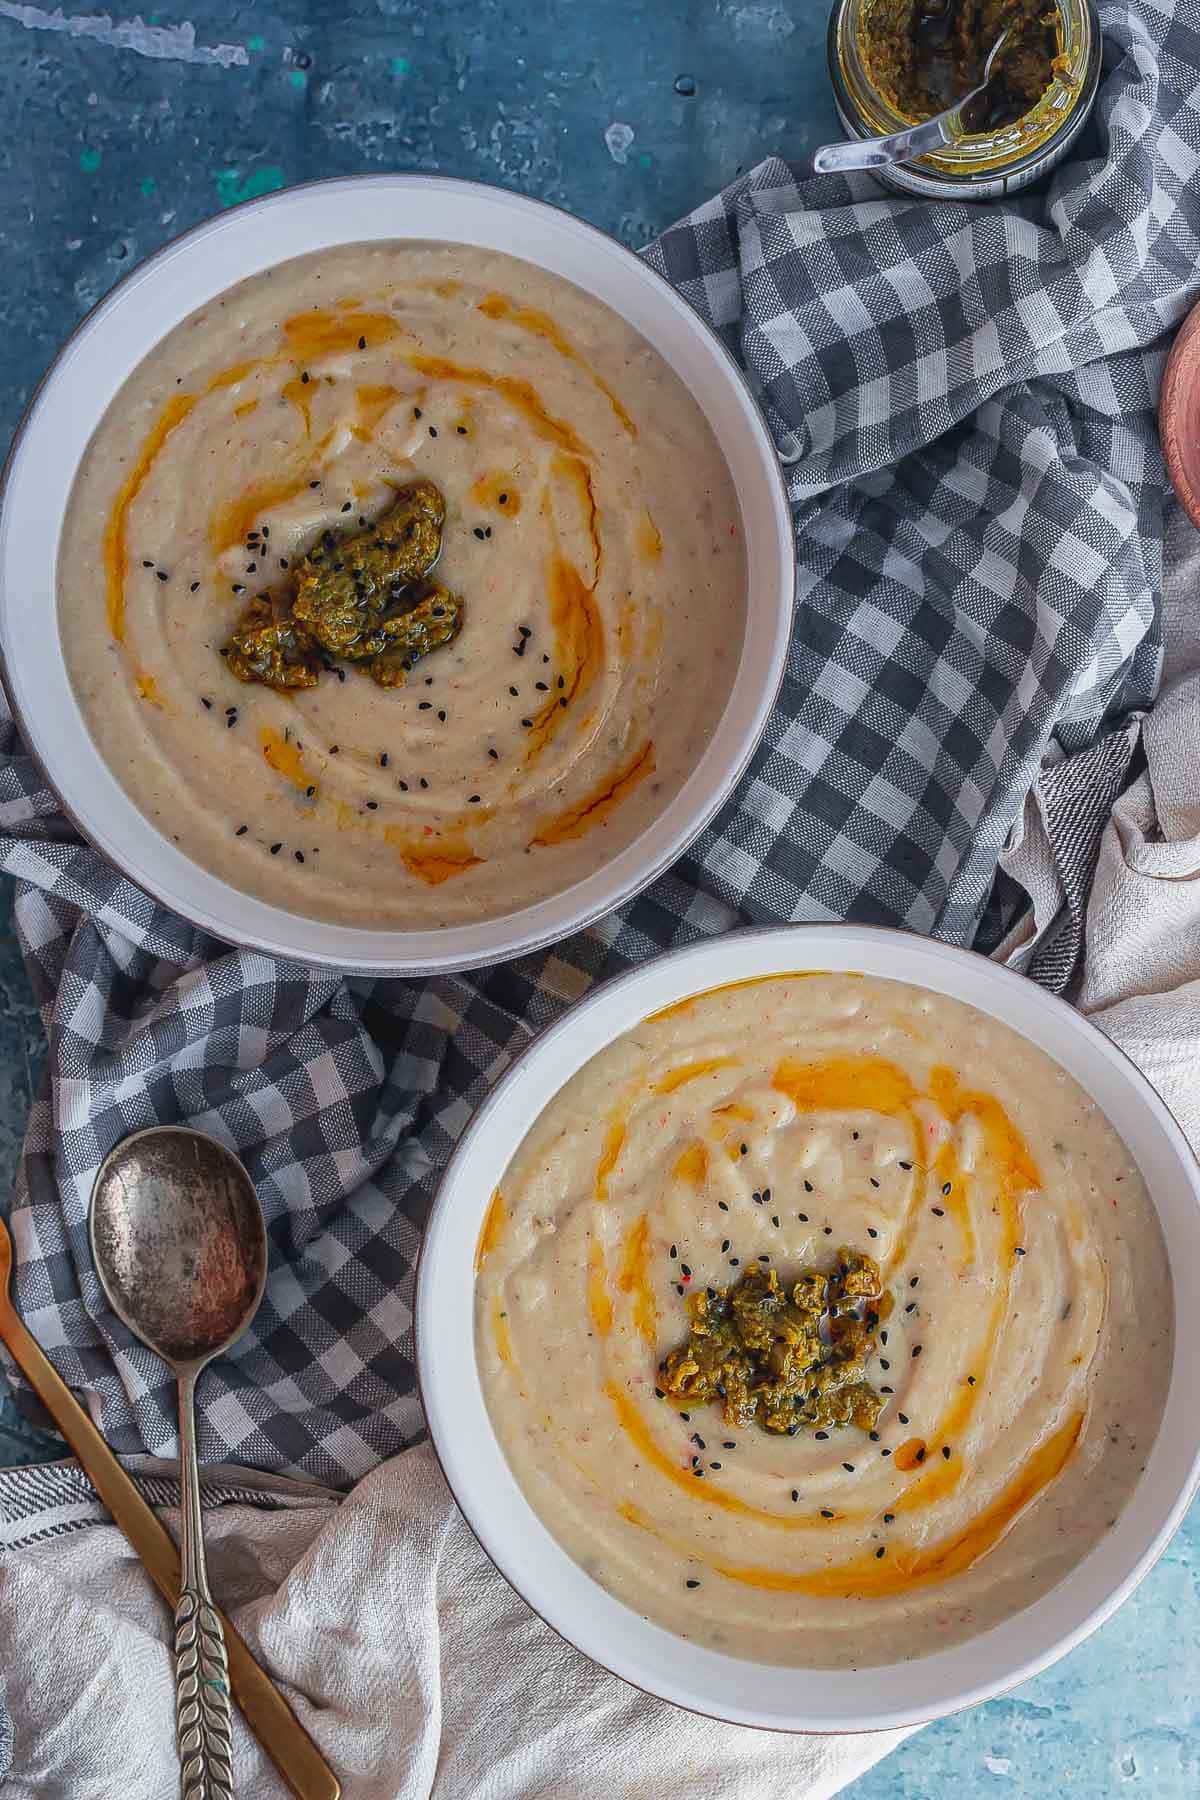 Overhead shot of two bowls of creamy soup on a checked cloth with spoons